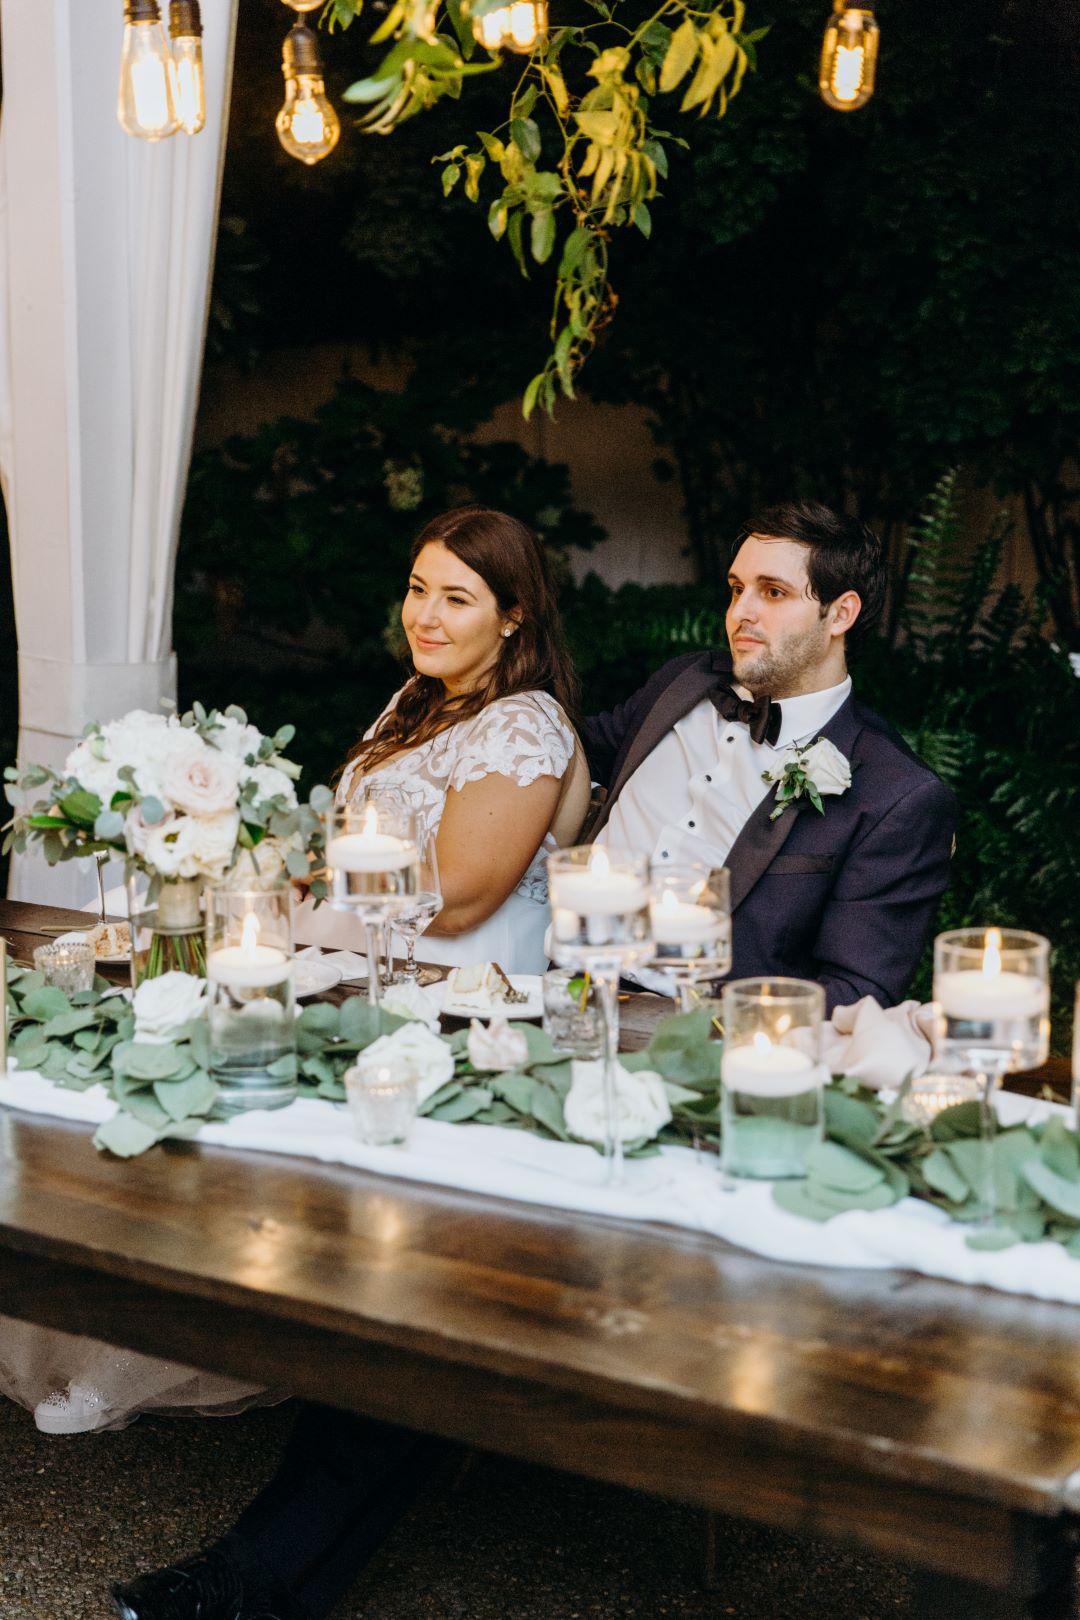 Bride and groom sitting at head table during their reception at earthy summer garden wedding in September, neutrals & greenery